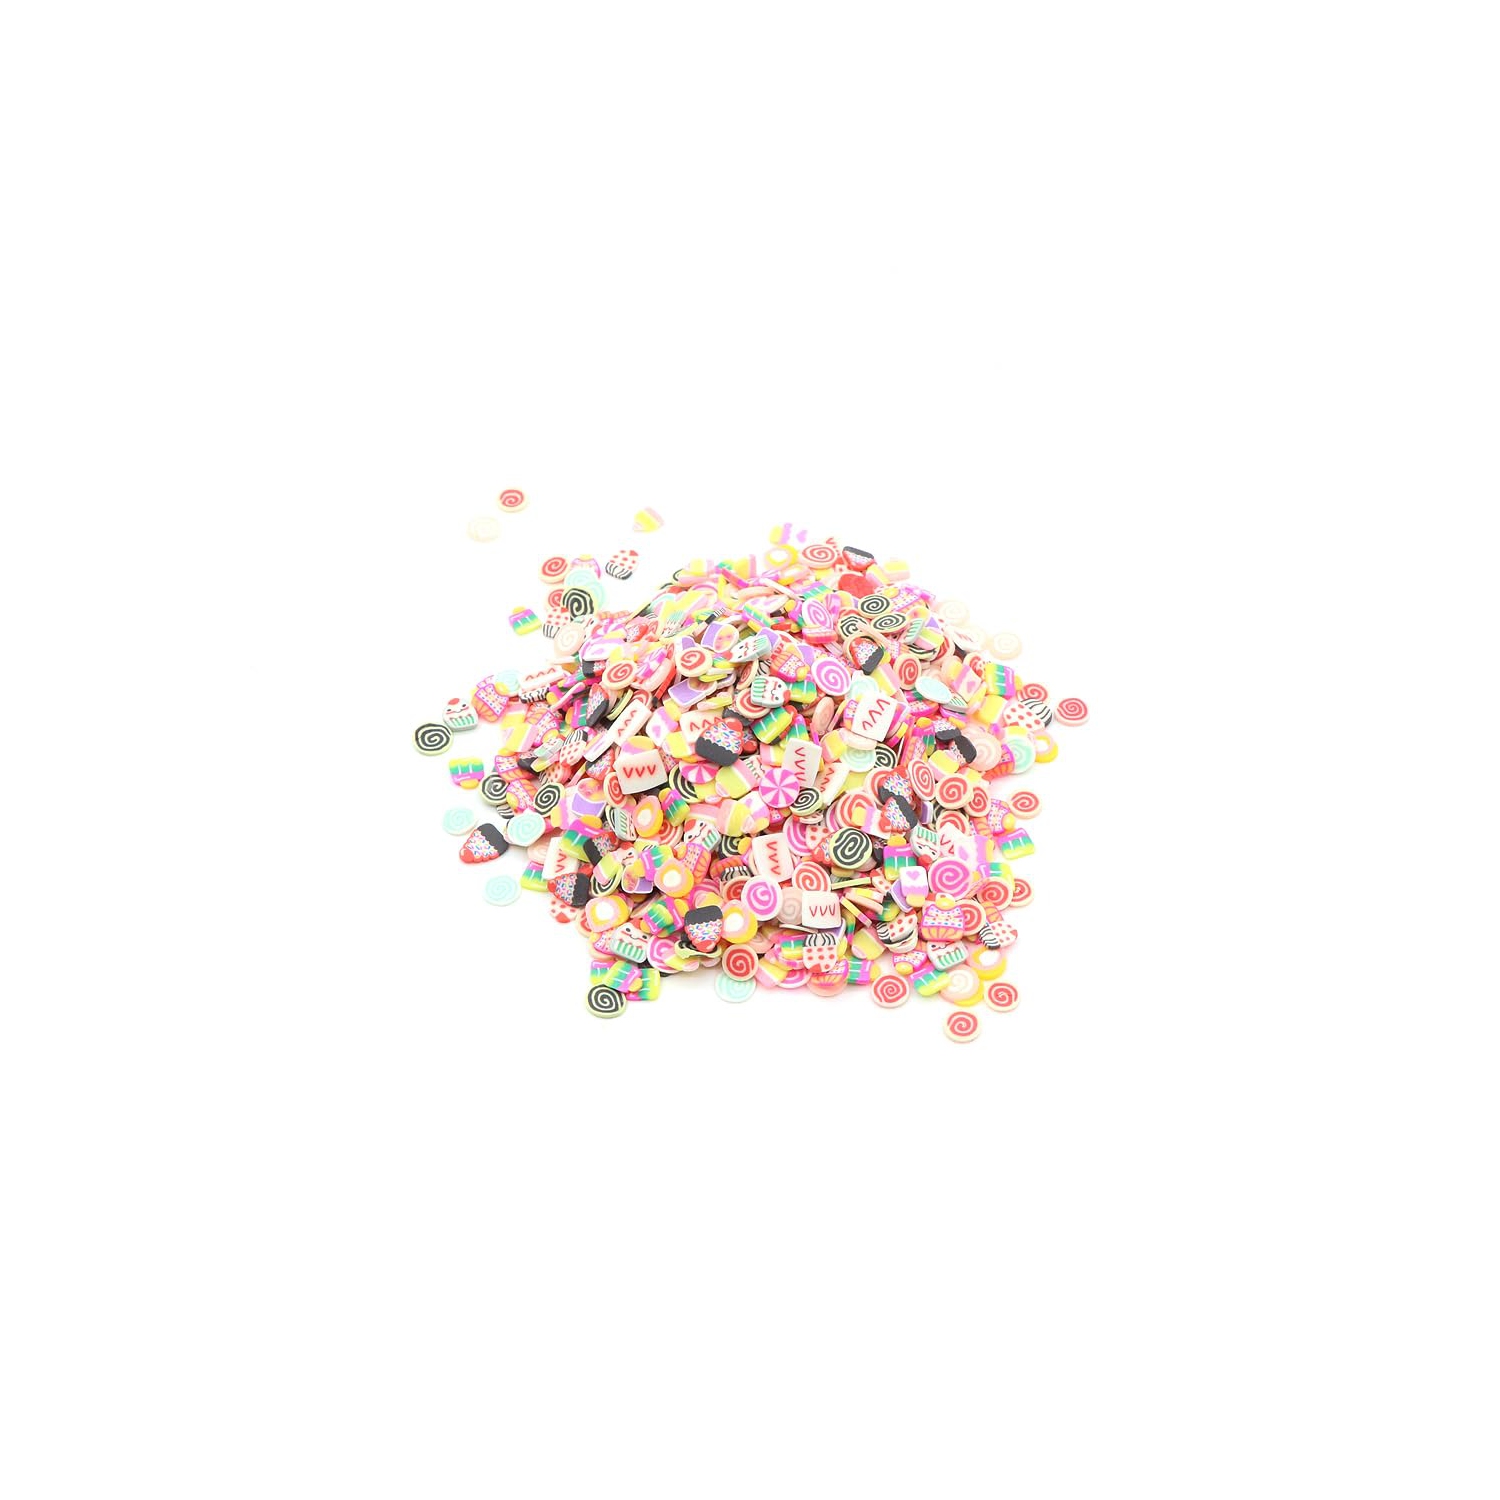 20g Polymer Clay Slices Sprinkles Soft Clay Nail Shaker DIY Craft Slime Crystal Filler Accessories - Mix Fruit Flower Animal Heart Cat's paw Letter Constellation